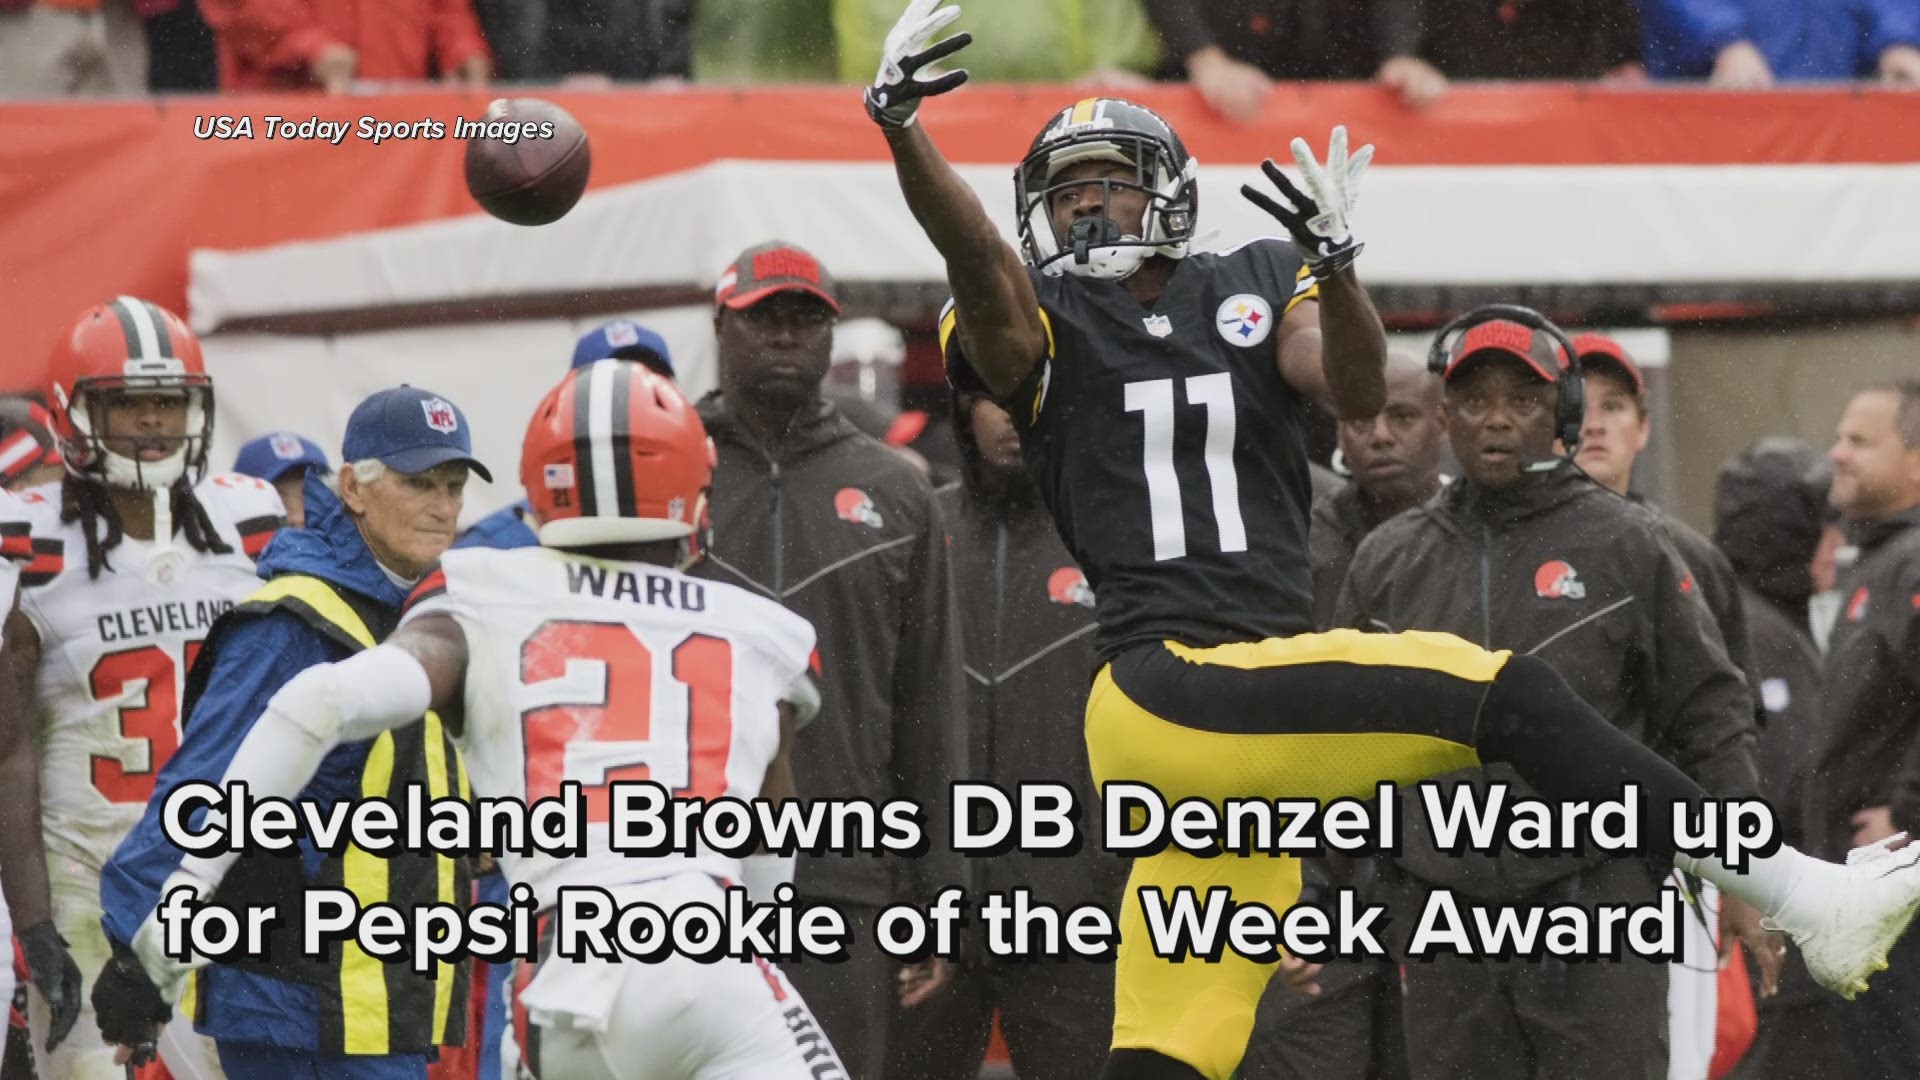 VOTE ' Cleveland Browns DB Denzel Ward up for Pepsi Rookie of the Week Award